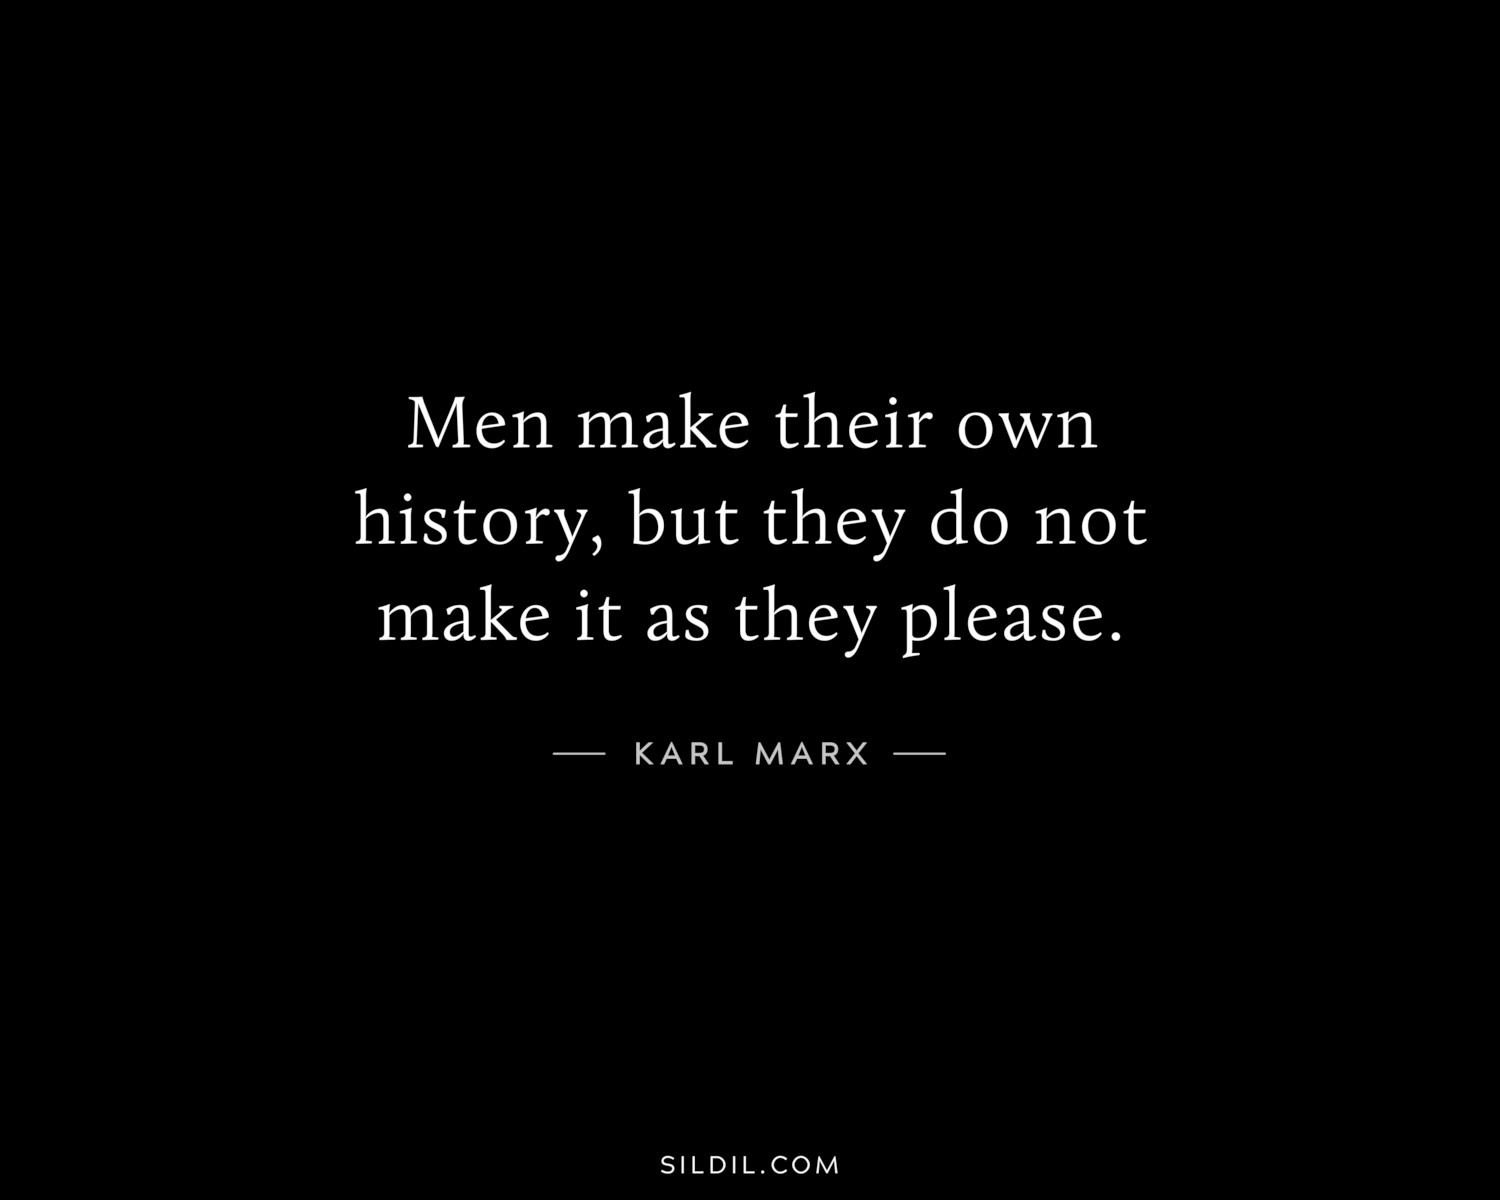 Men make their own history, but they do not make it as they please.